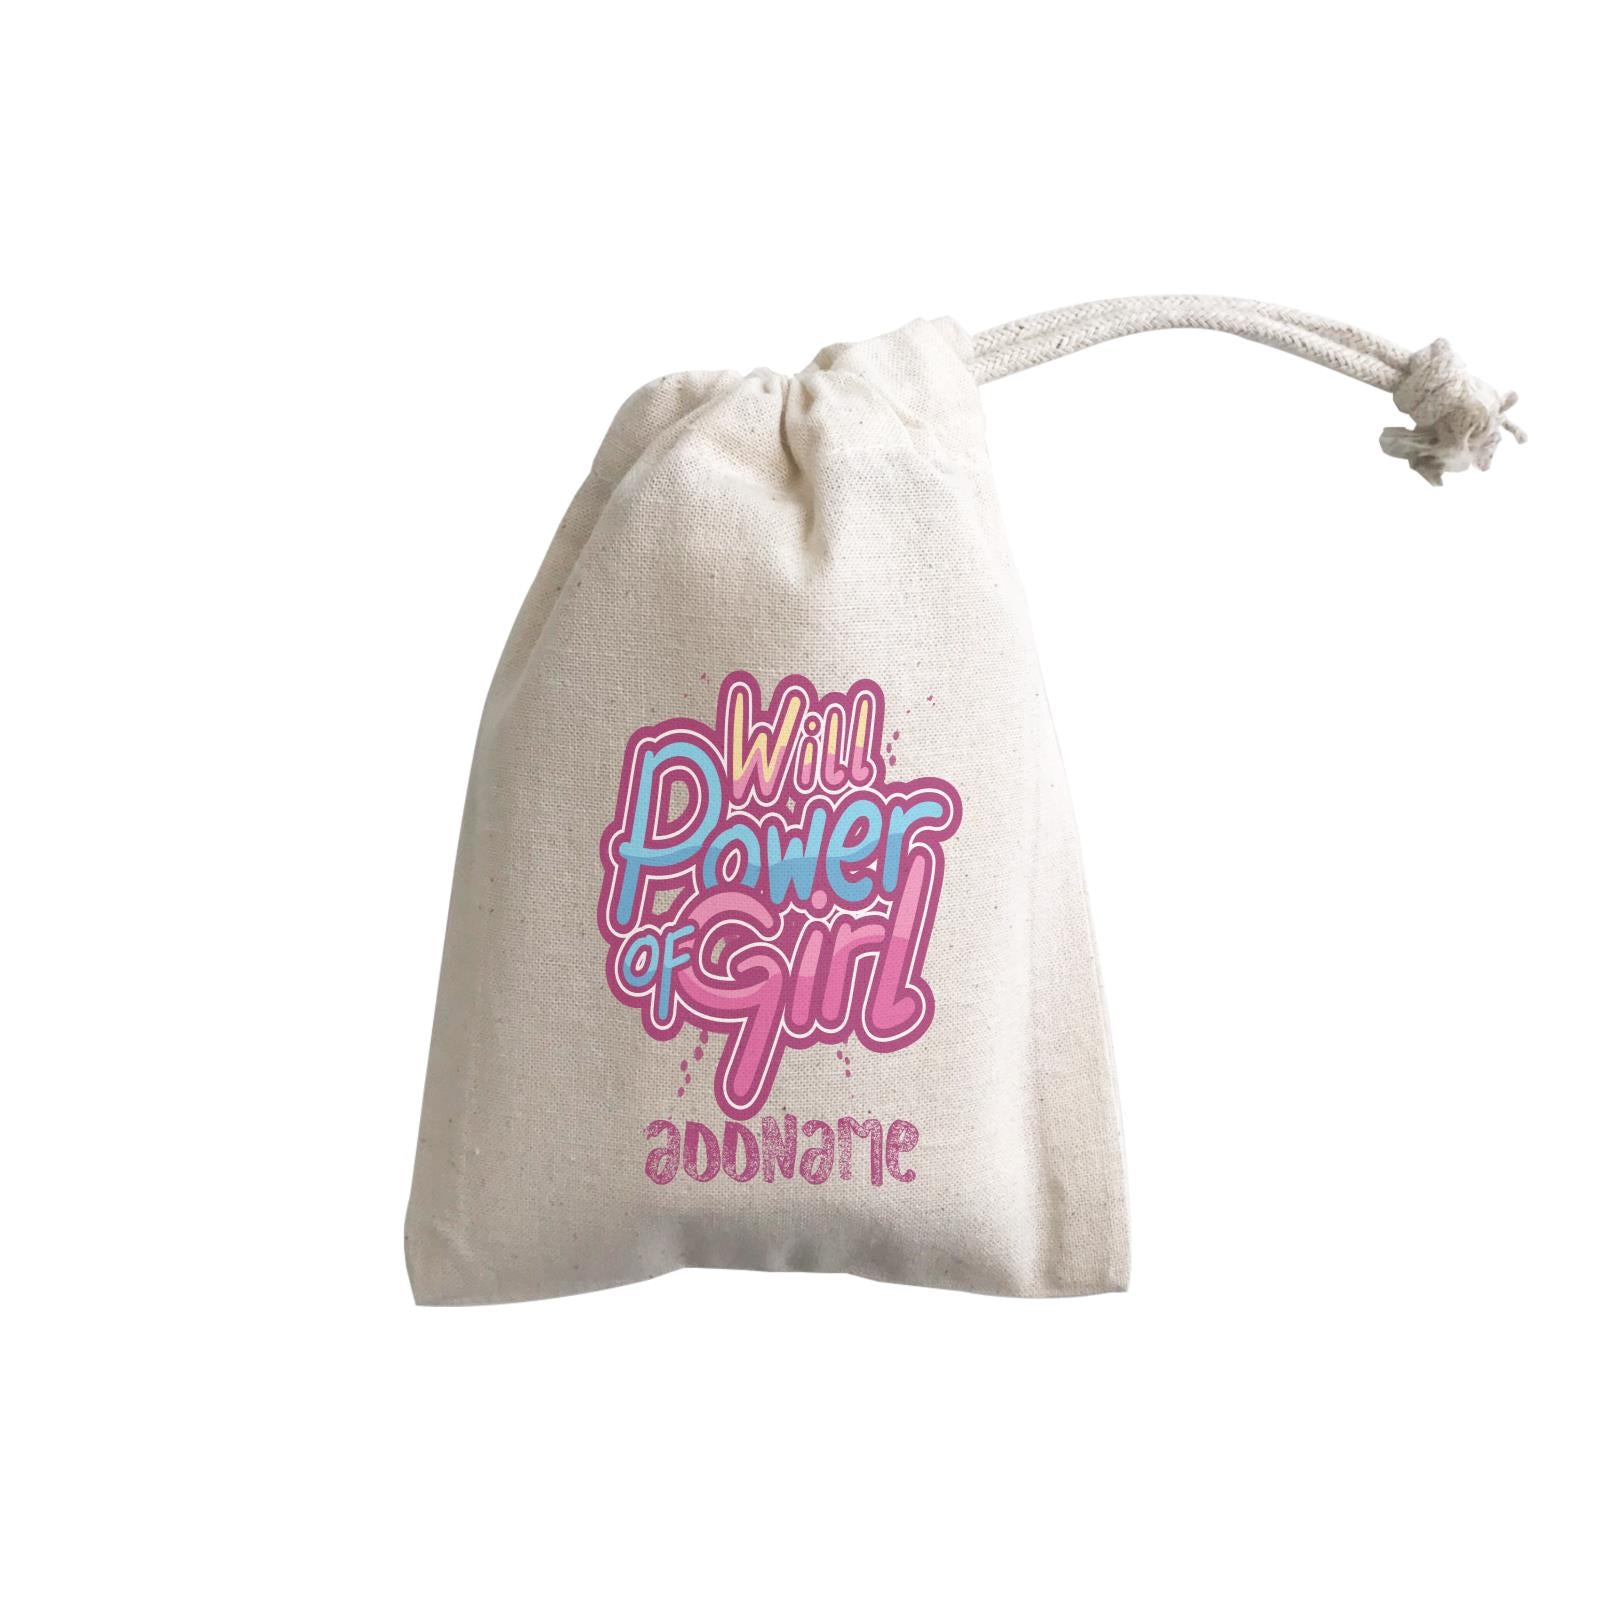 Cool Cute Words Will Power Of Girl Addname GP Gift Pouch